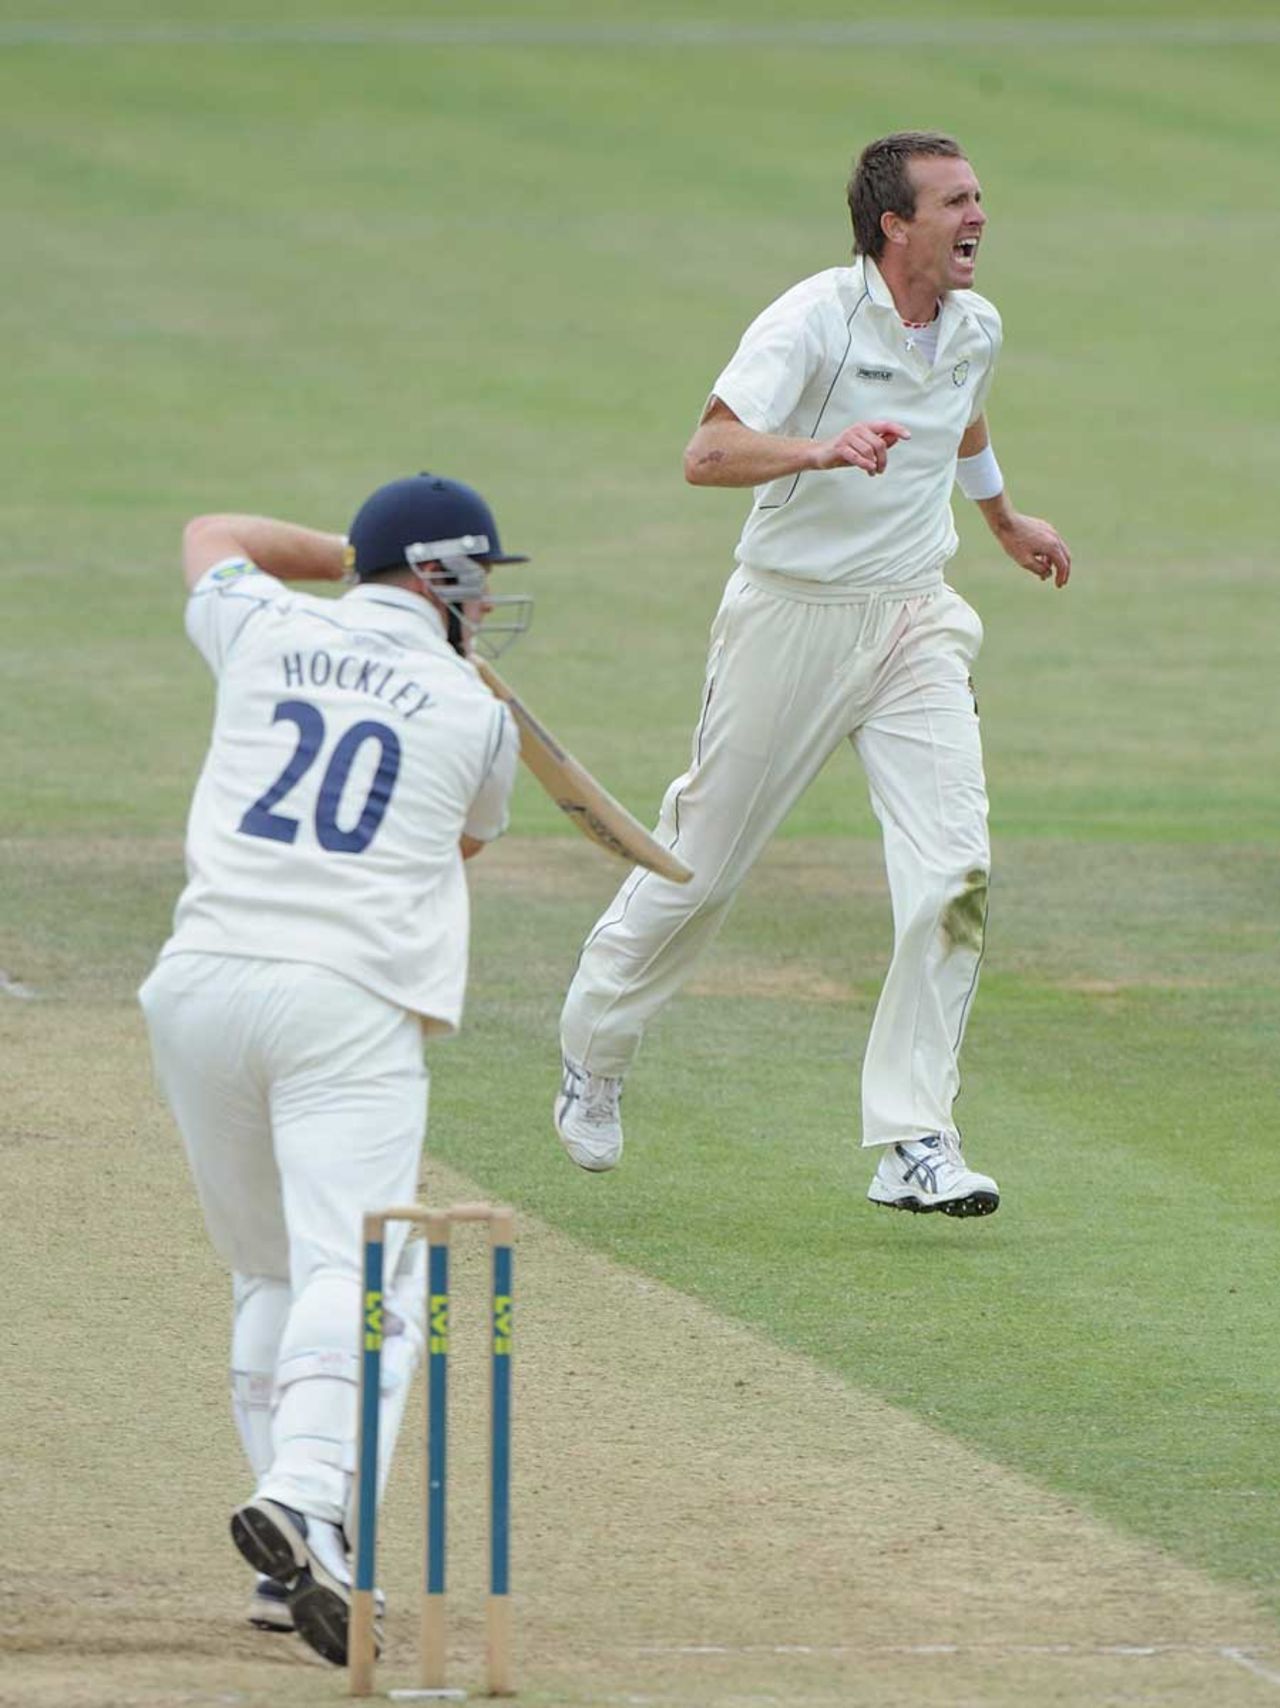 Dominic Cork removed James Hockley as Kent collapsed, Hampshire v Kent, County Championship Division One, Southampton, July 7, 2010